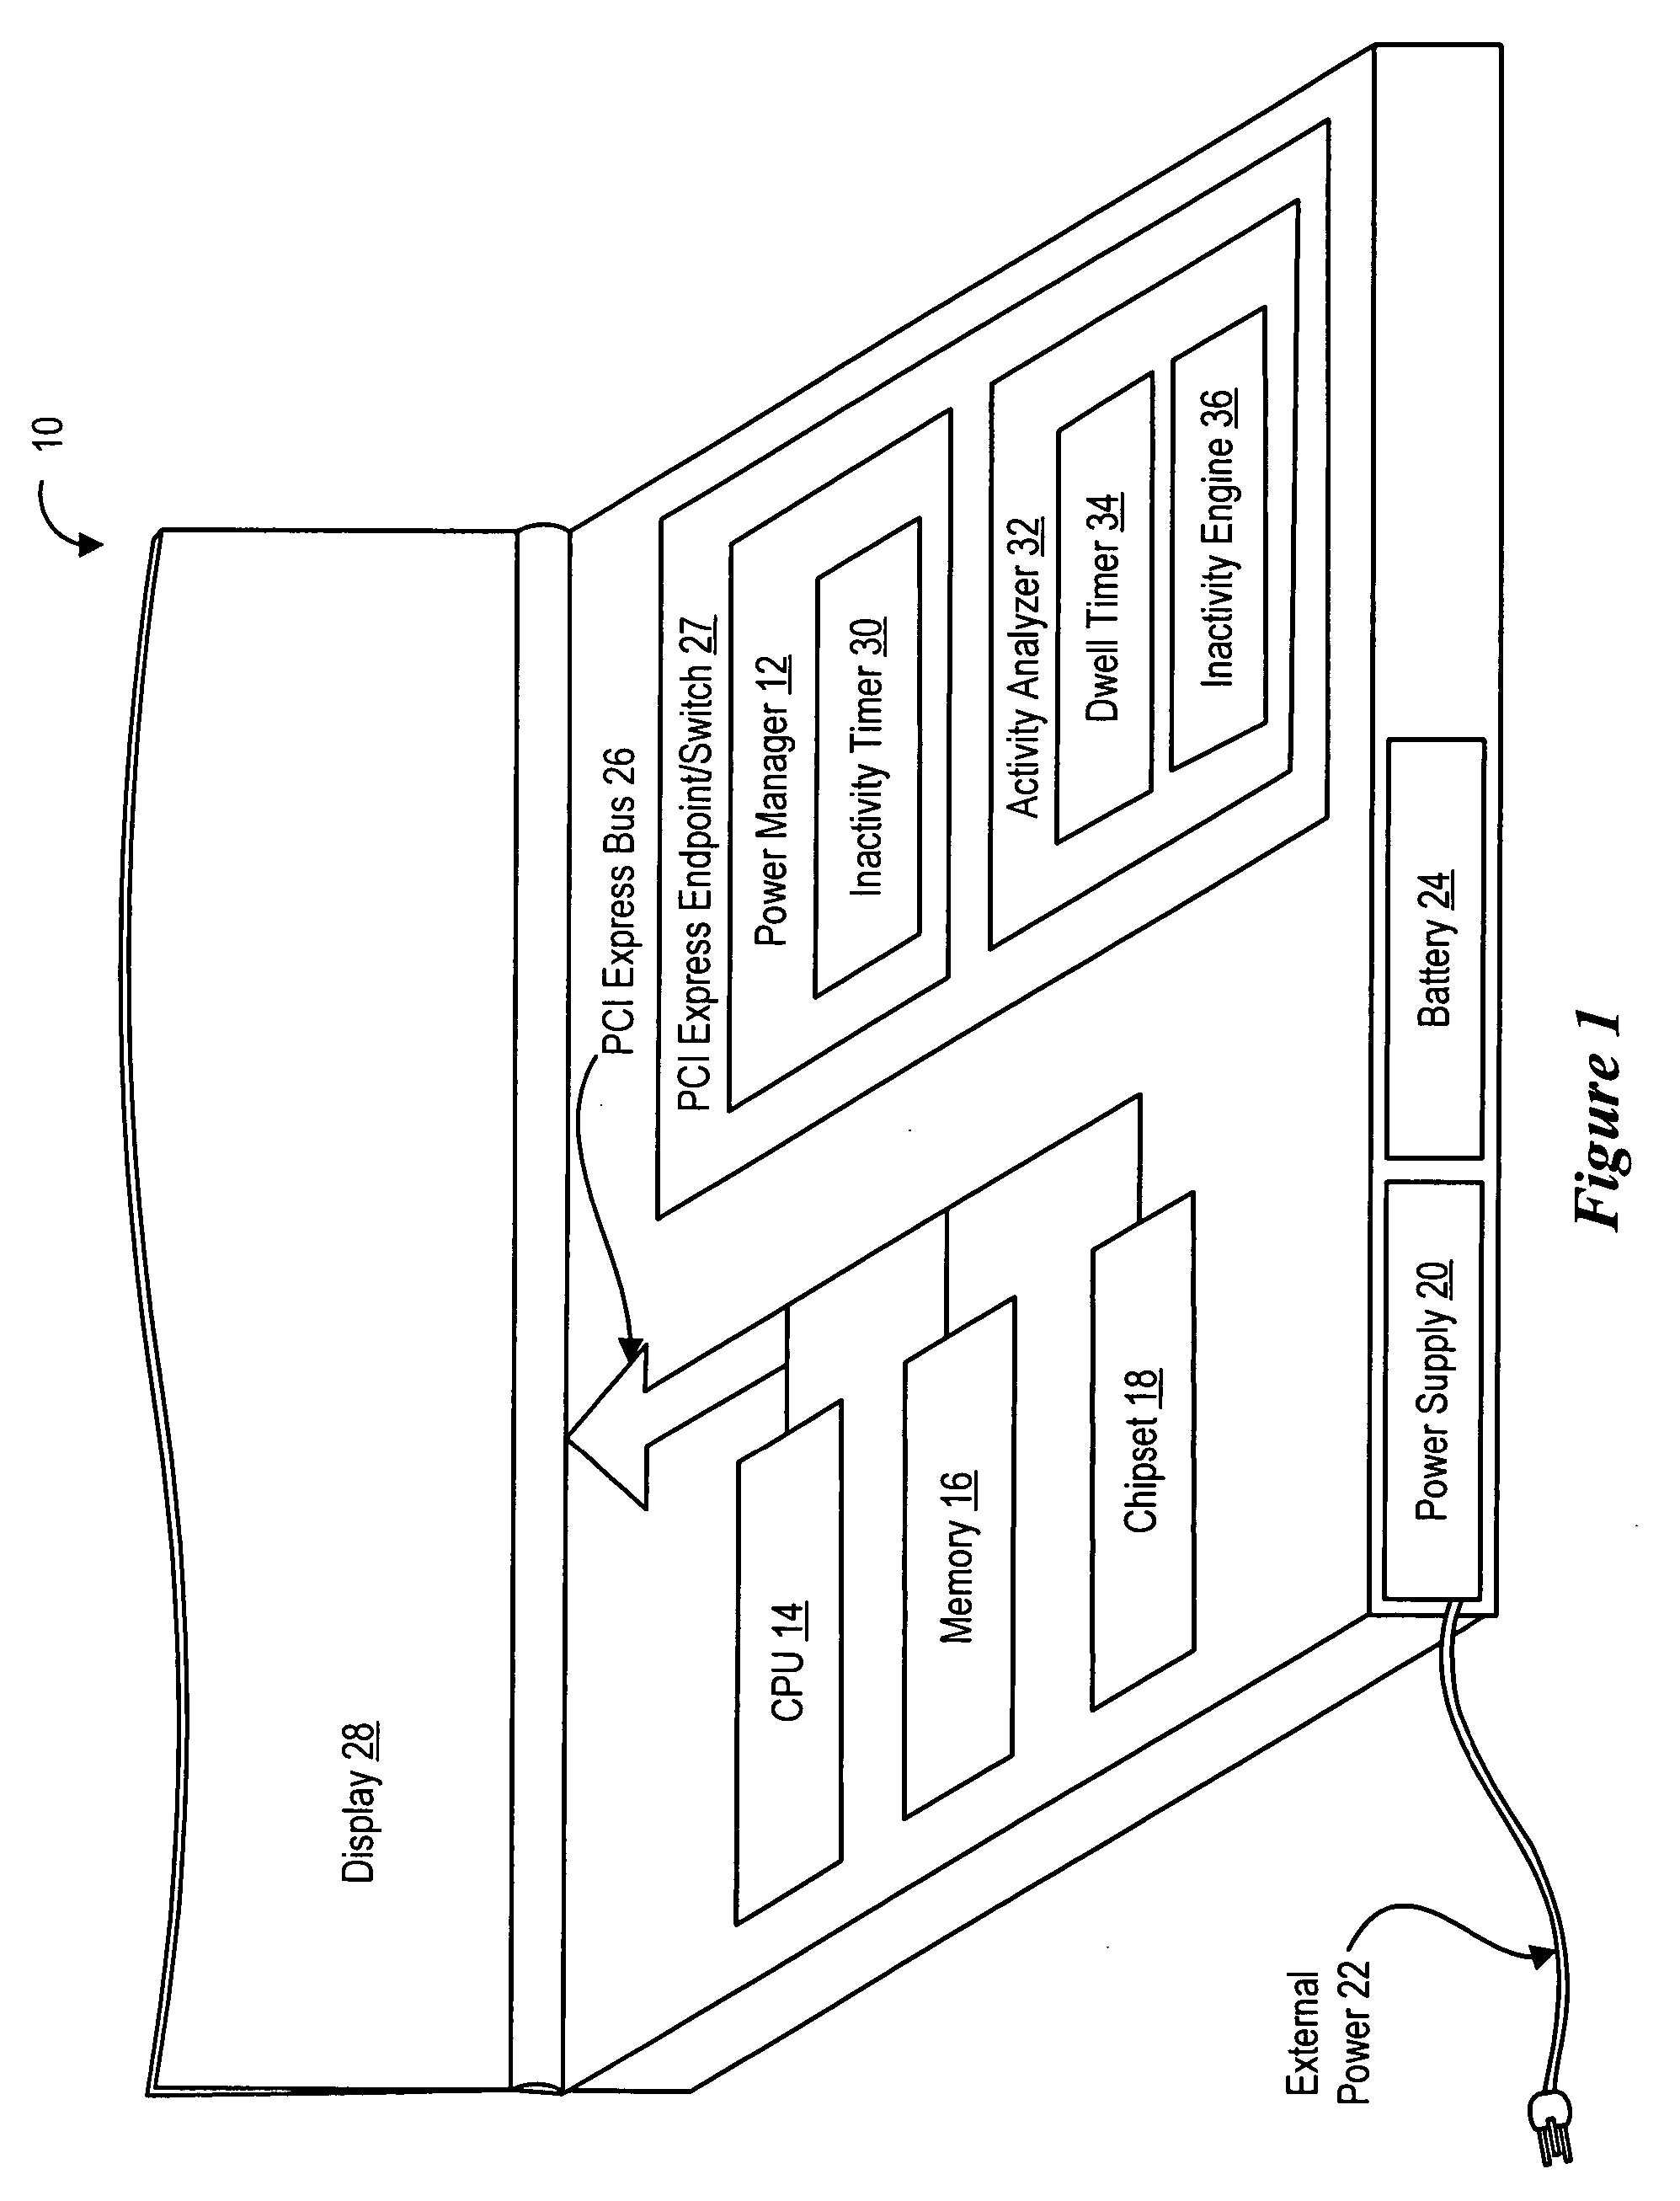 System and method for information handling system adaptive variable bus idle timer